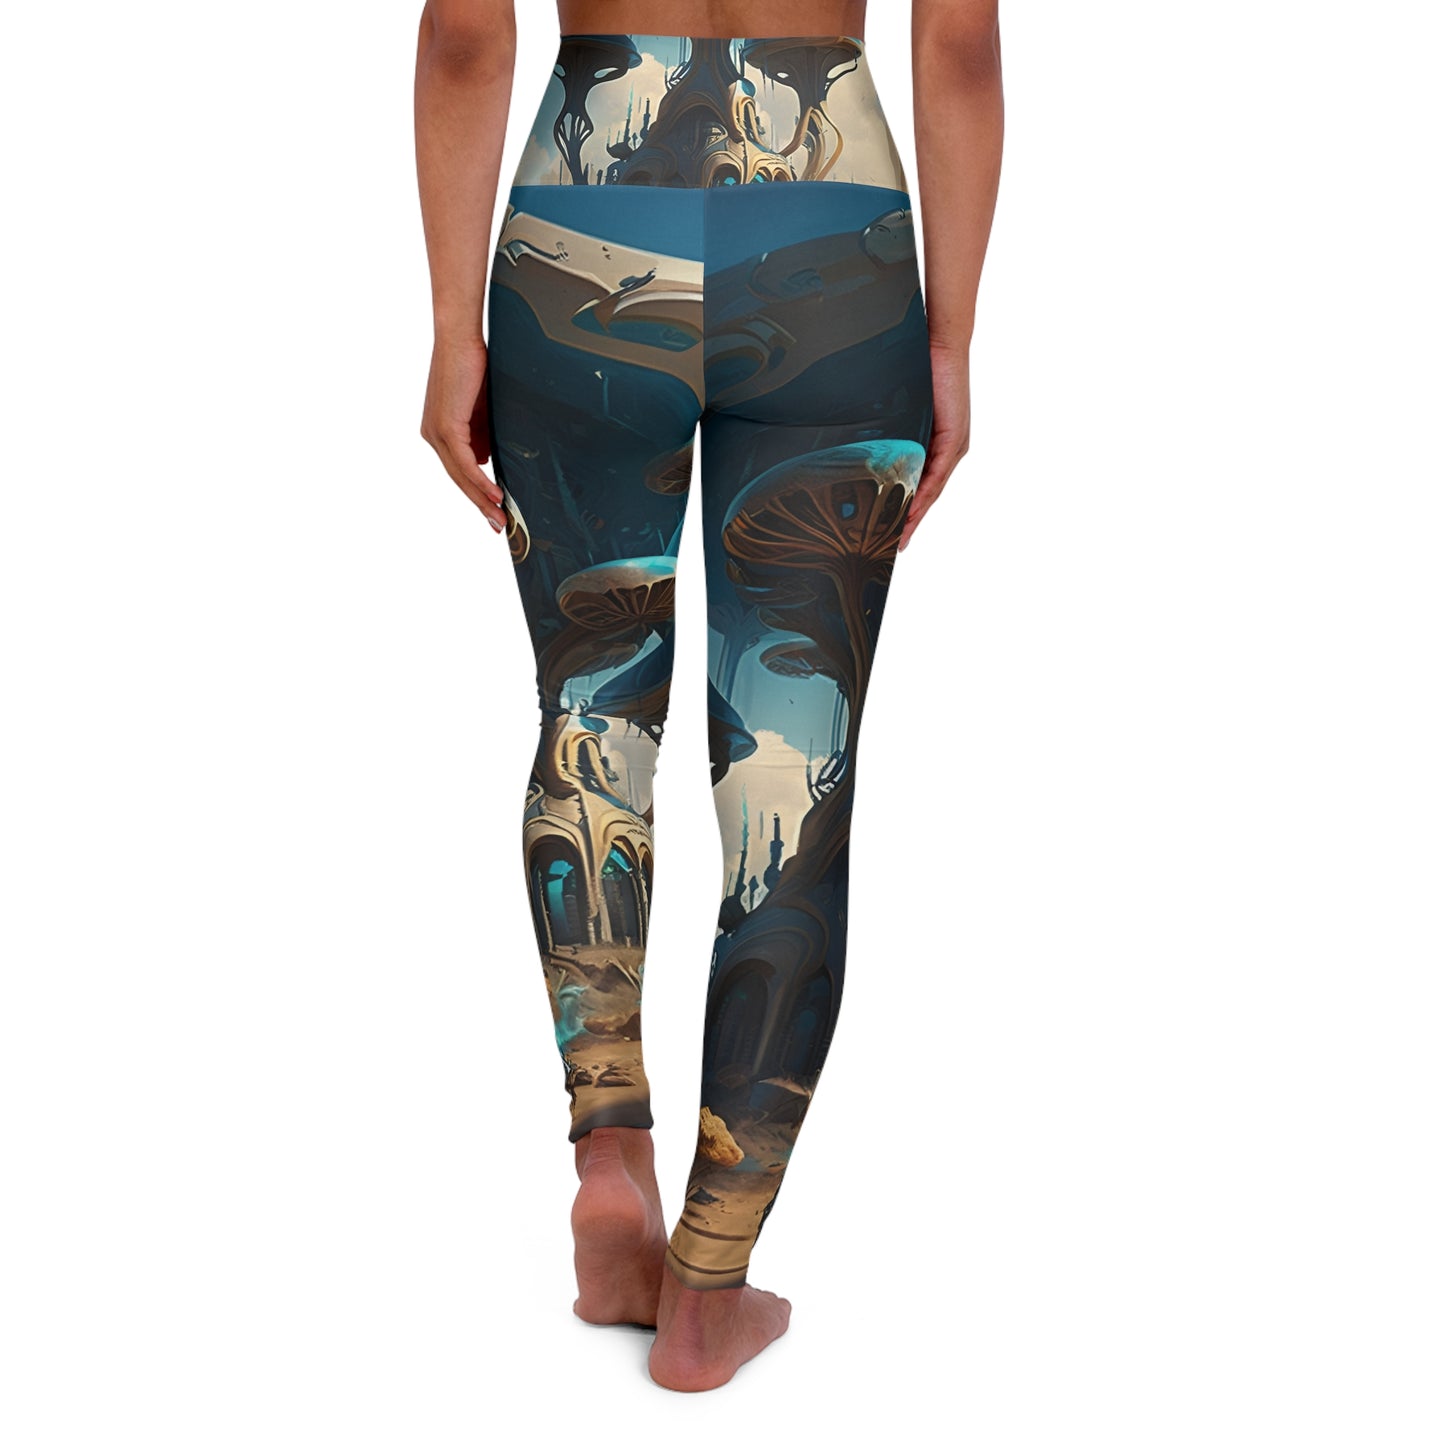 Unleash Your Style with Futuristic Mushroom Leggings - Embrace Magical and Mystical Fashion! High Waisted Yoga Pants, Whimsical Design Style, Woman Girl